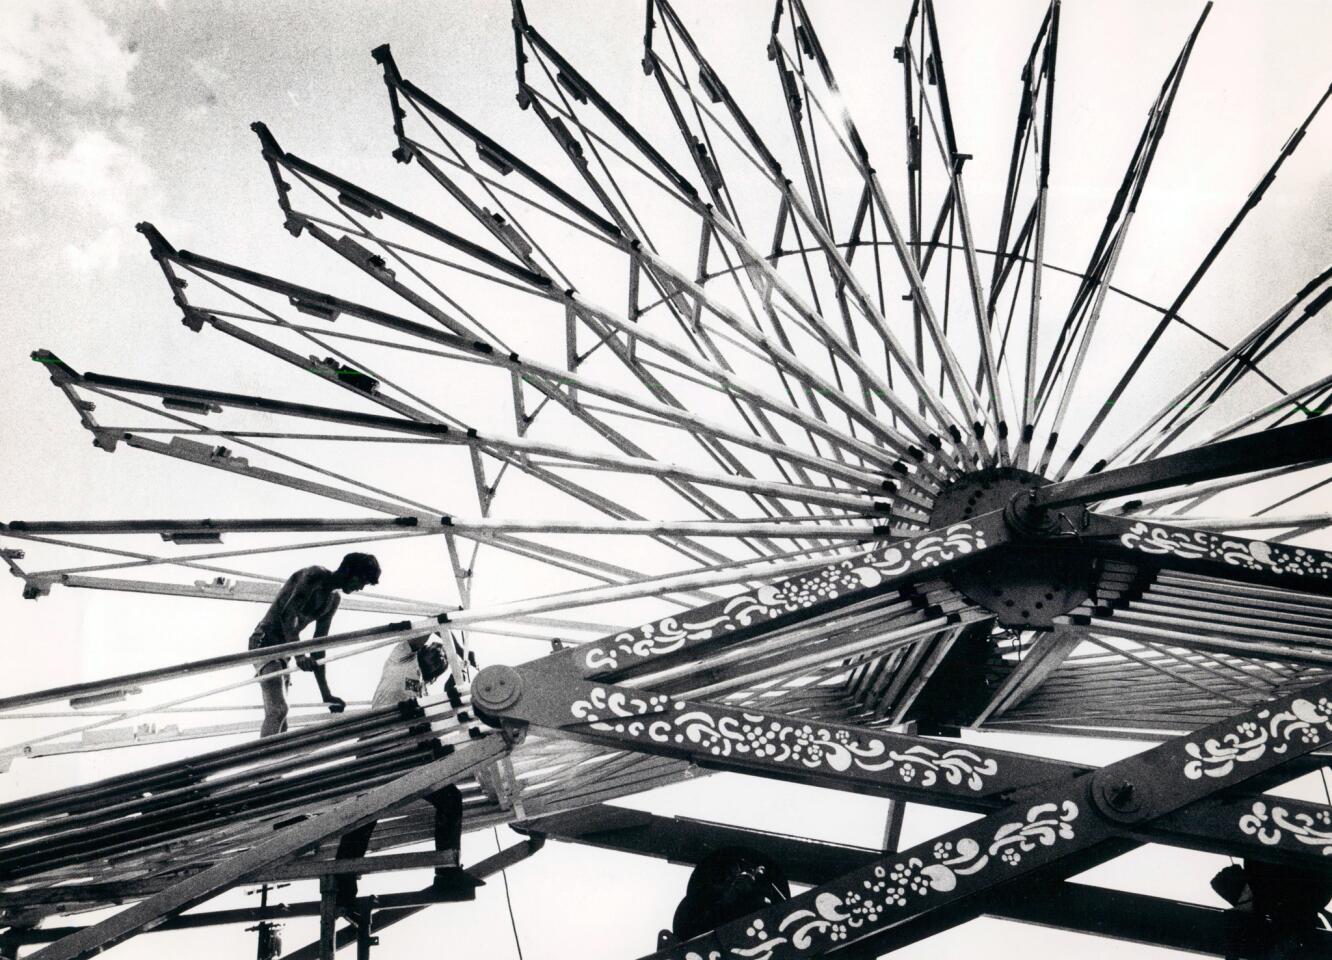 Workers assemble a ride before the 1981 Maryland State Fair.